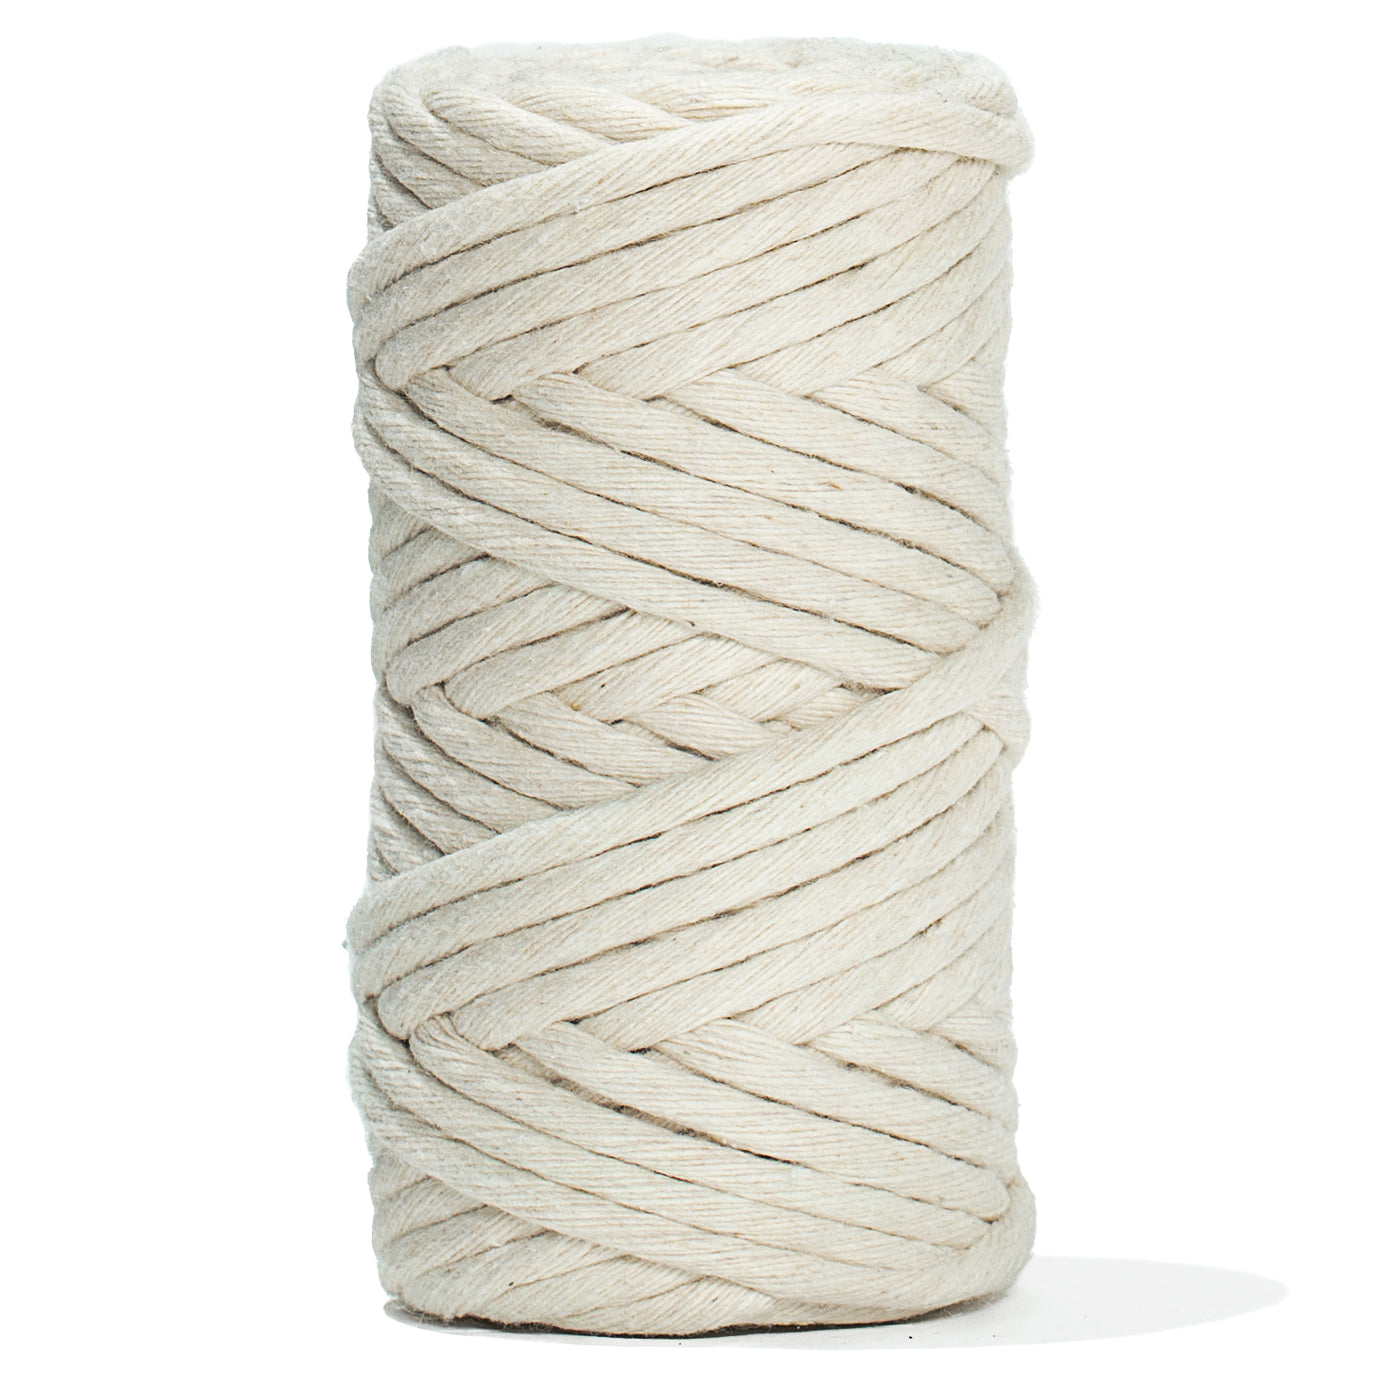 5 Meters/Lot Beige Cotton Rope 4-20mm Thick Cotton Cords for Bag